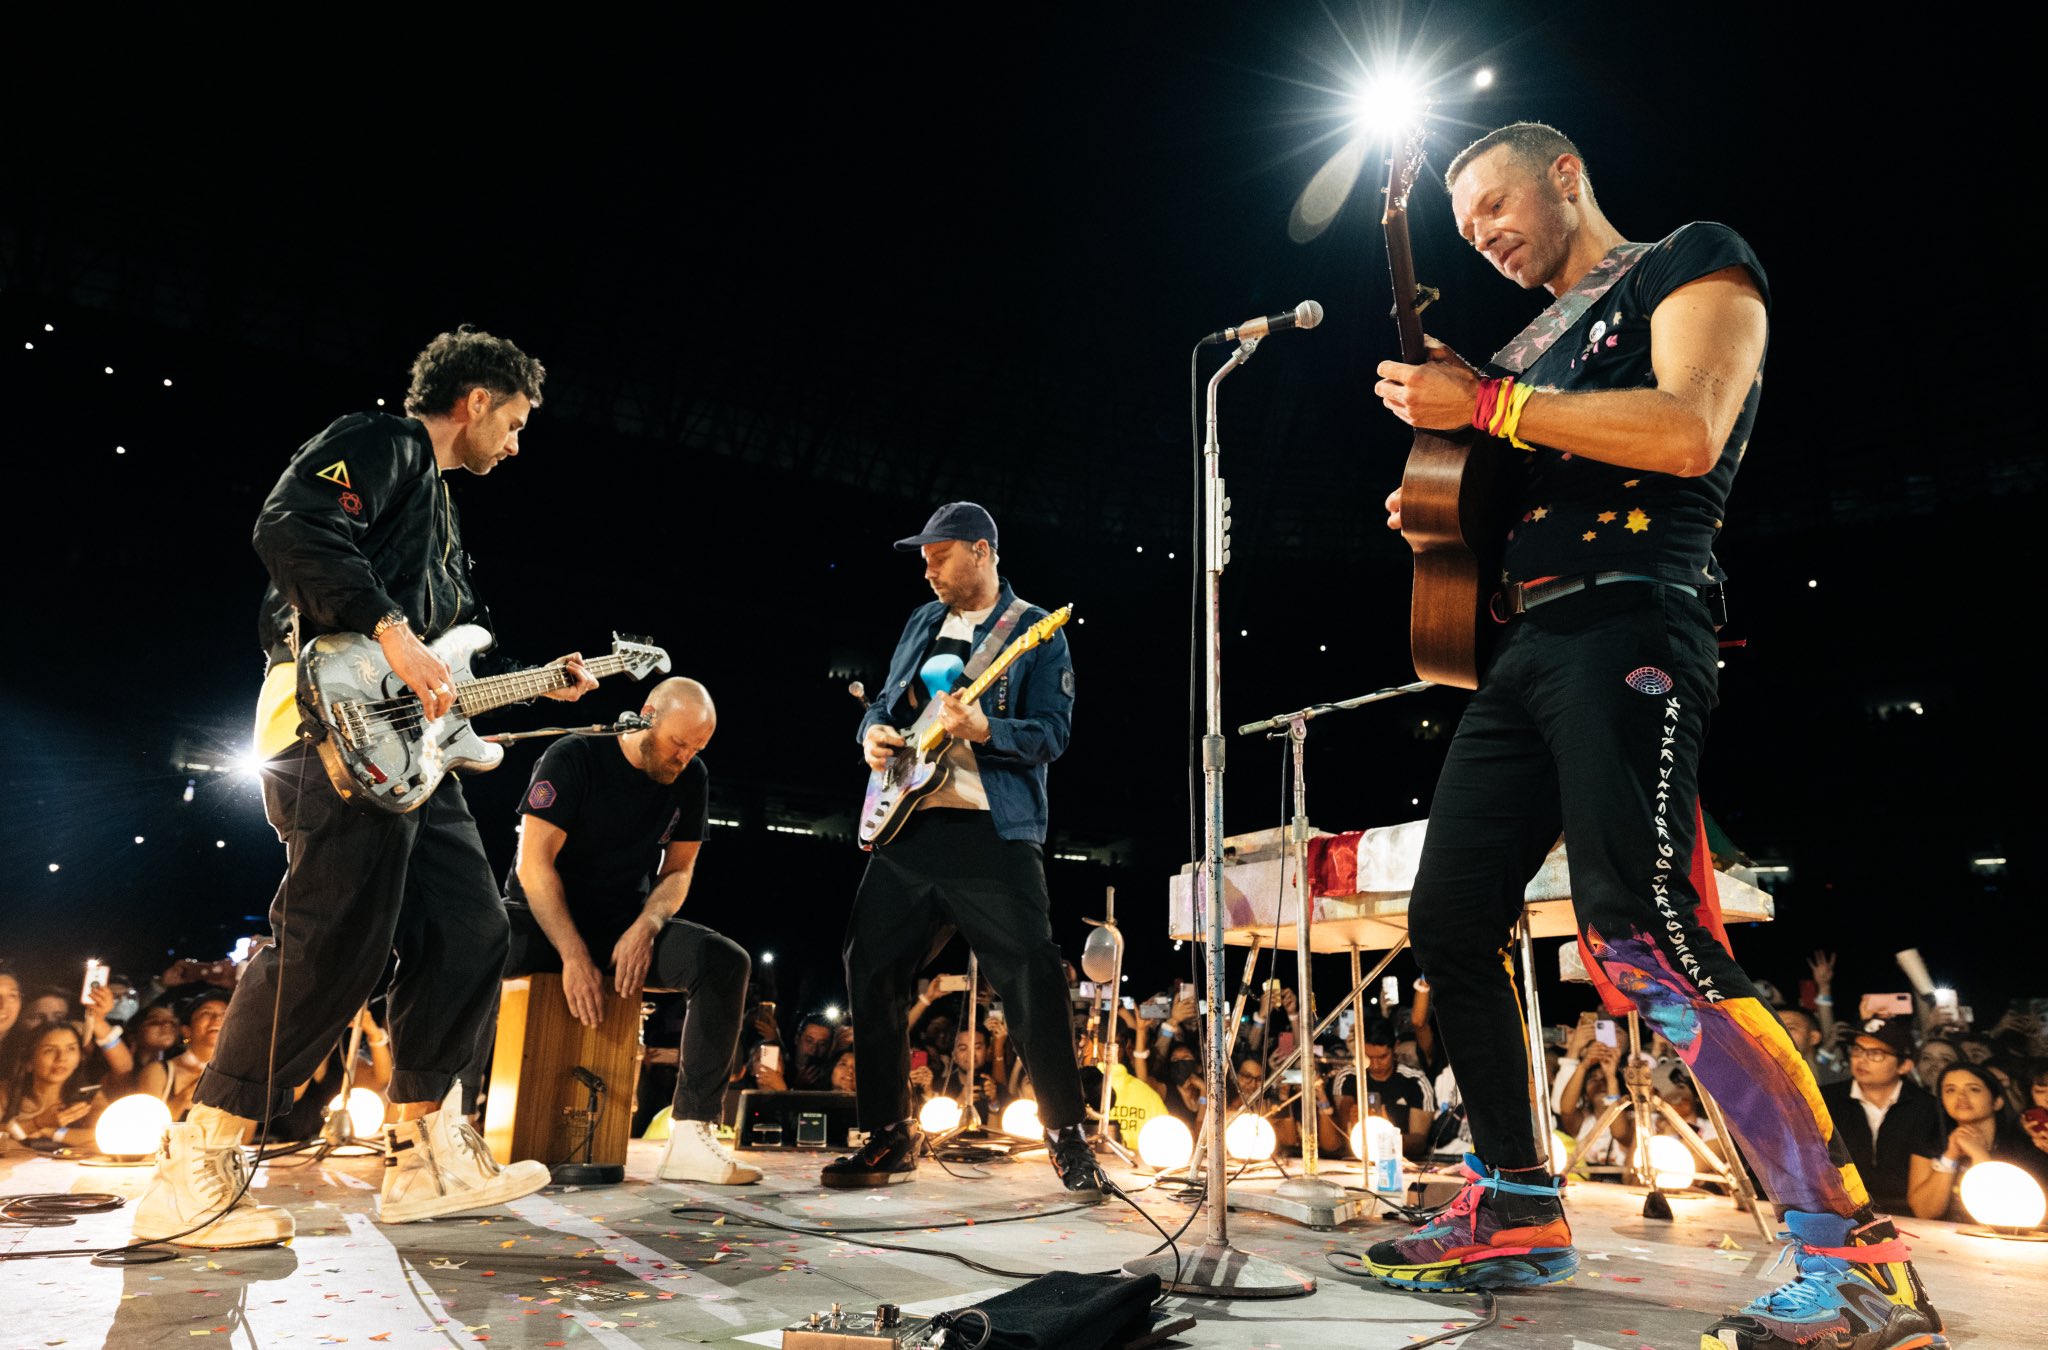 Coldplay at the Cotton Bowl - Photo Courtesy of Coldplay